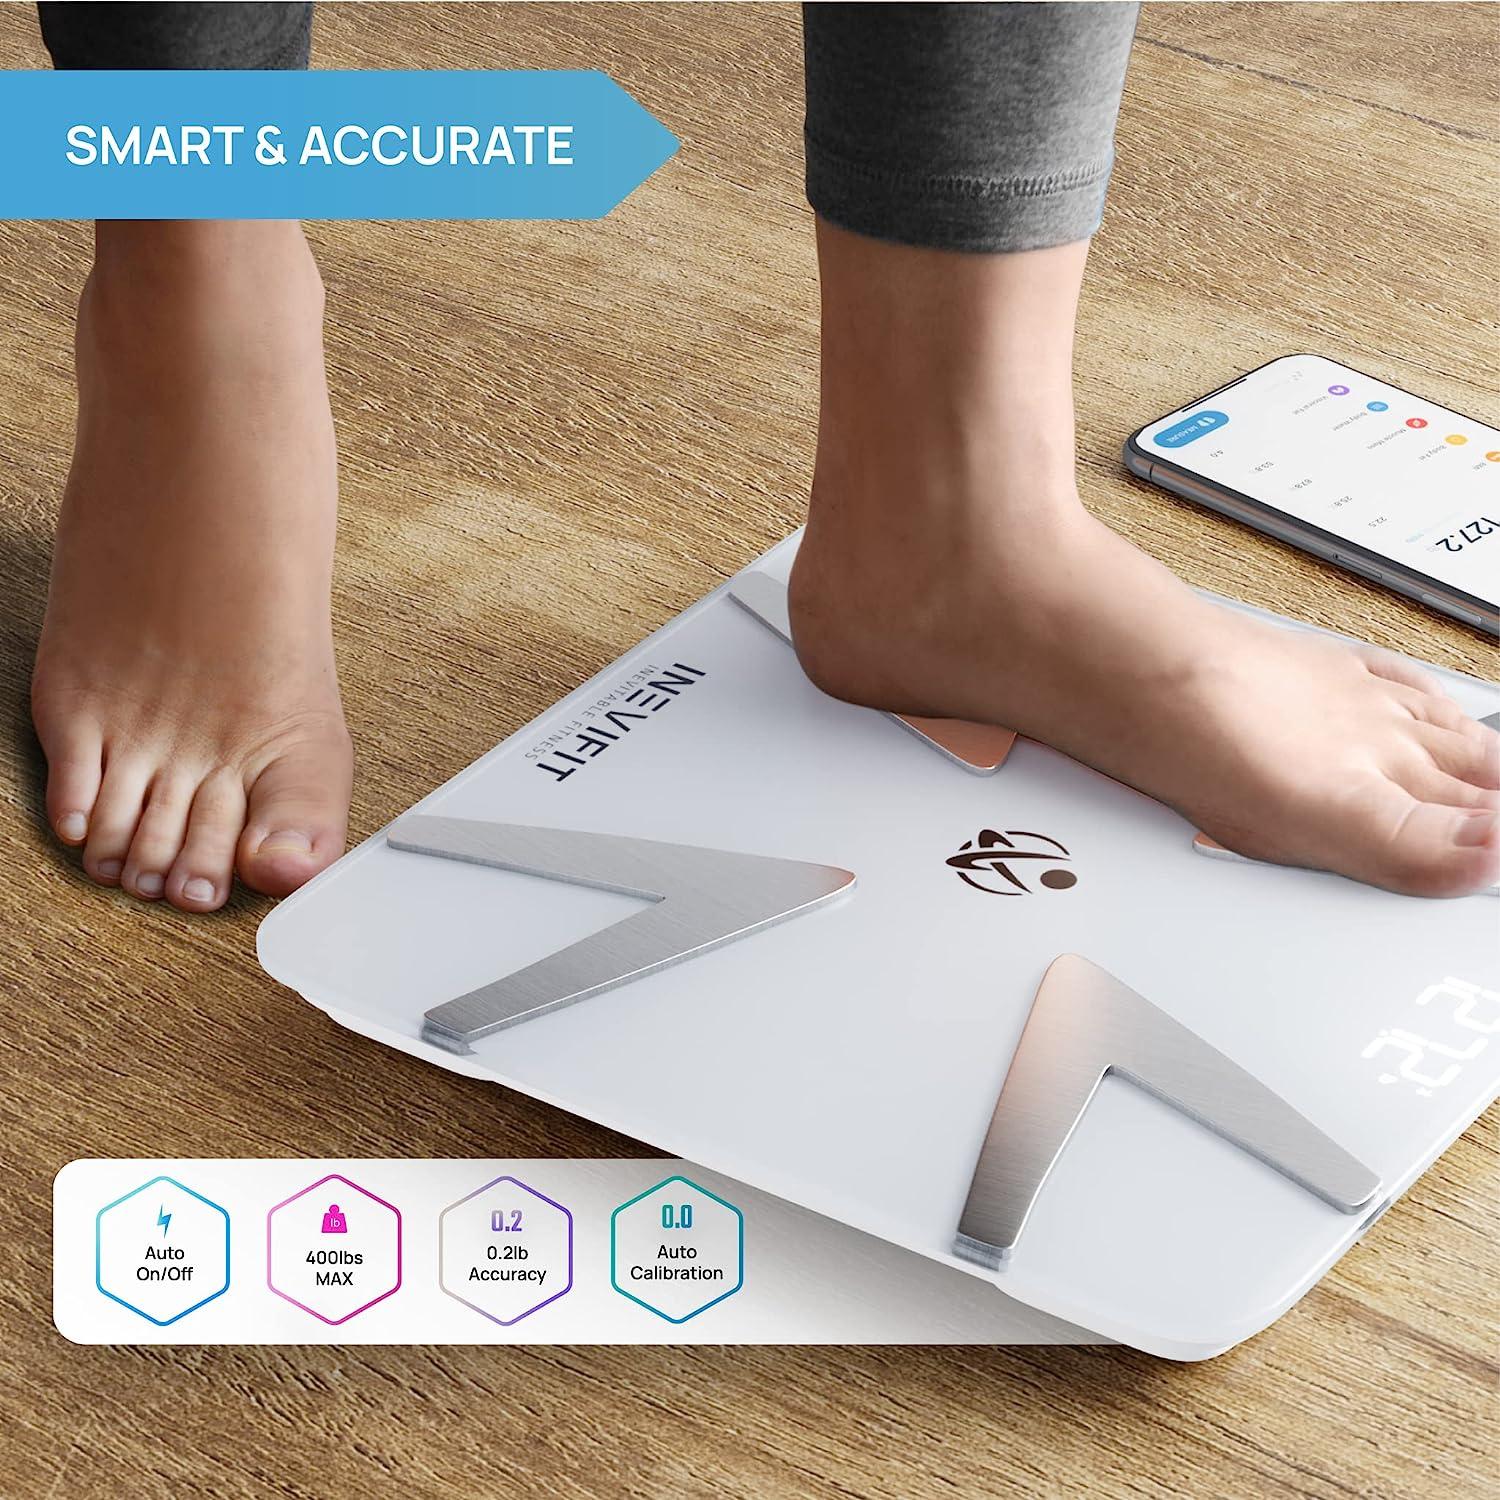 INEVIFIT Smart Body Fat Scale, Highly Accurate Bluetooth Digital Bathroom Body  Composition Analyzer, Measures Weight, Body Fat, Water, Muscle, BMI,  Visceral Fat & Bone Mass for Unlimited Users White